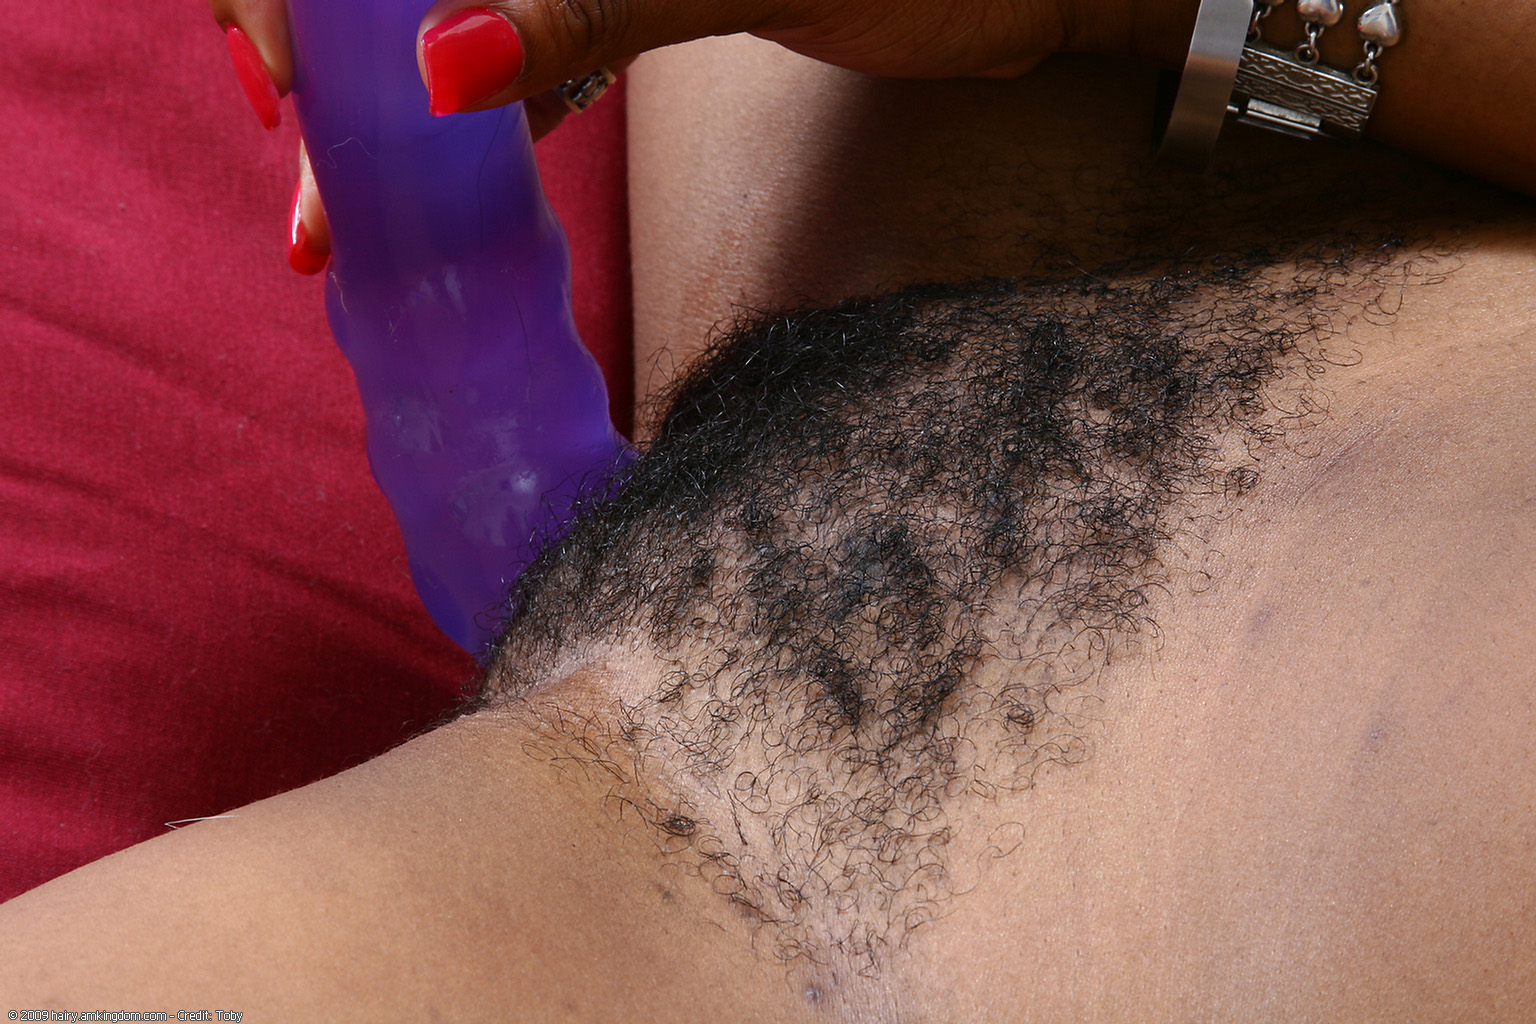 Felicia Atk Natural Hairy « ATK Natural And Hairy « Free ATK Pictures @ Bravo ATK